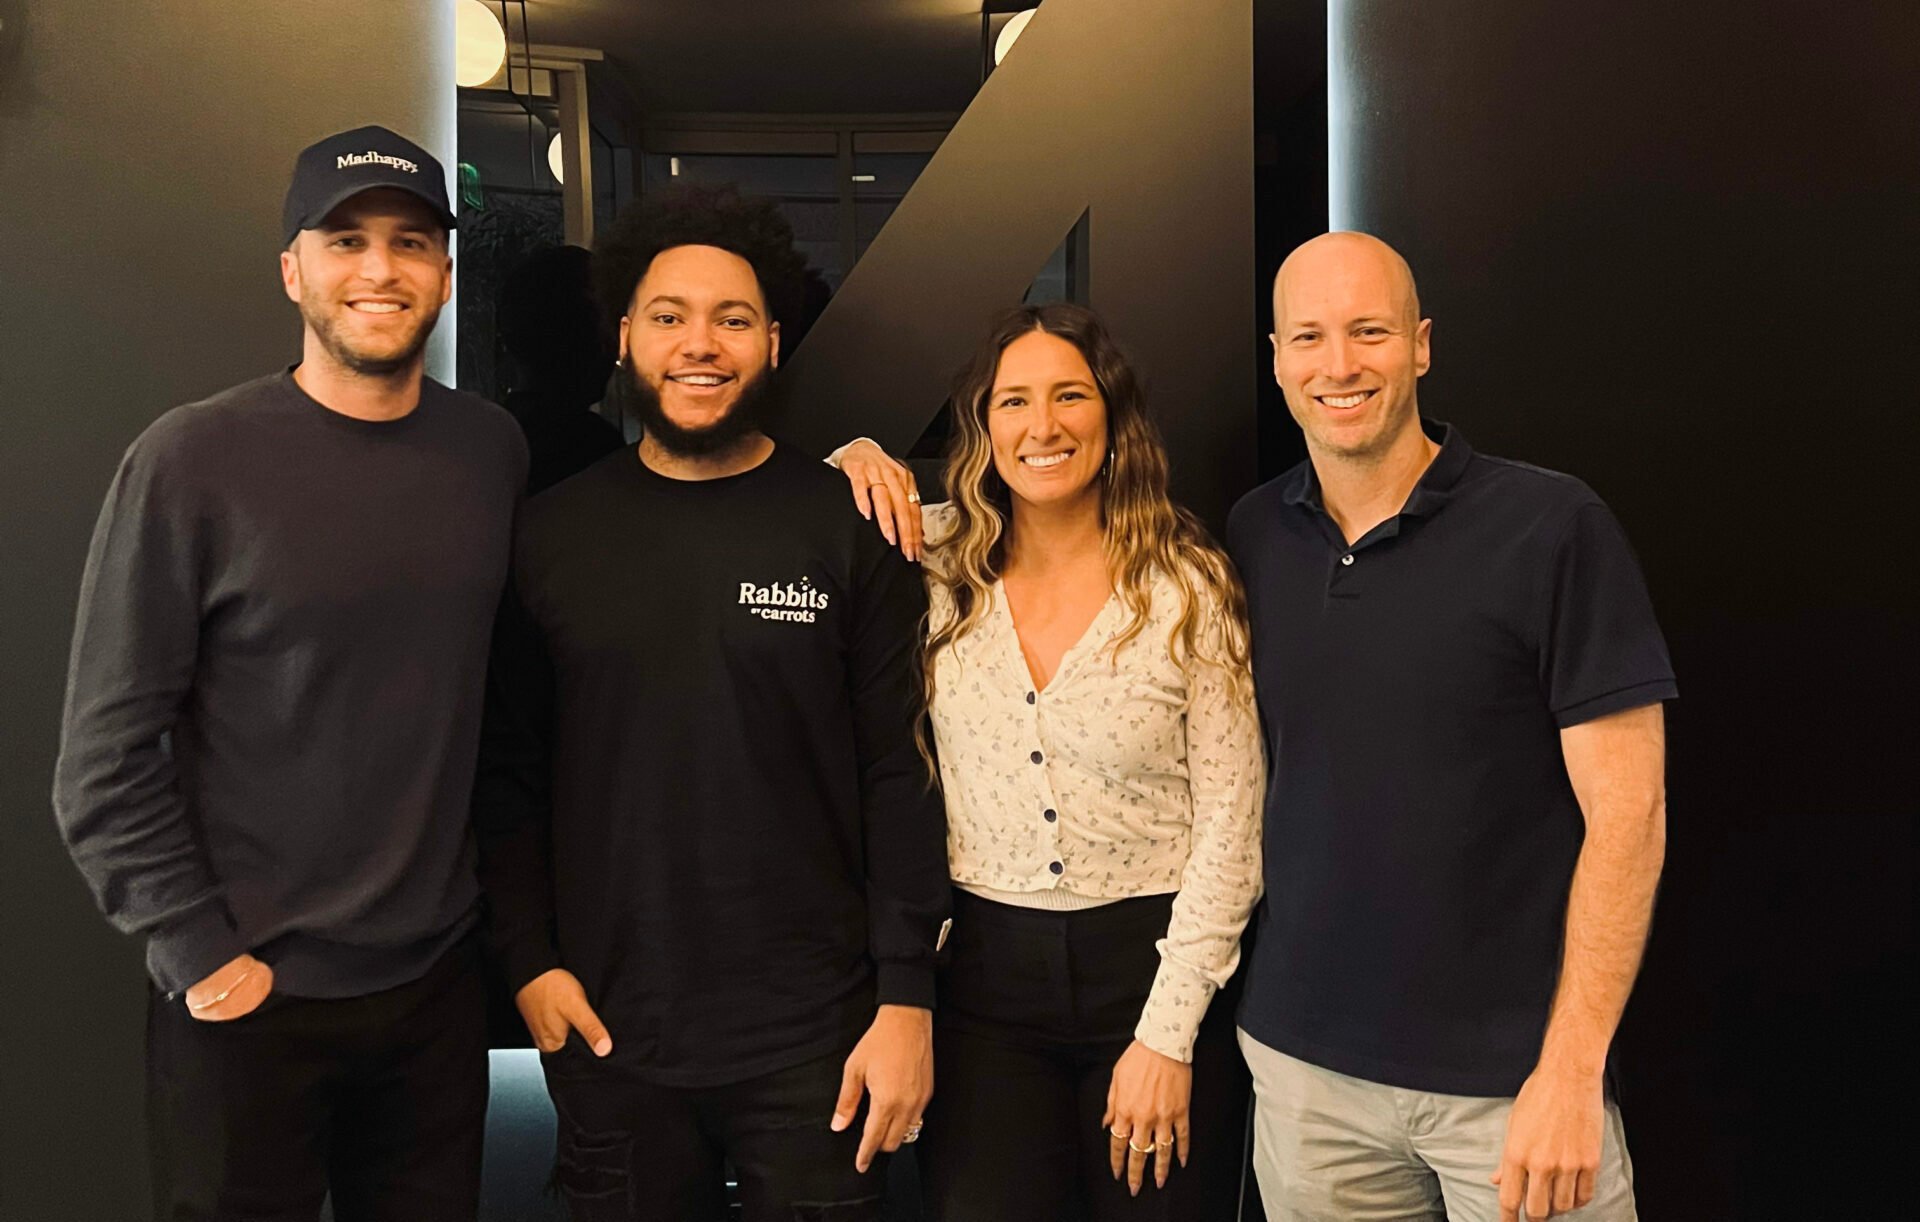 Mike Caren’s Artist Publishing Group inks deal with Chrishan in partnership with Warner Chappell